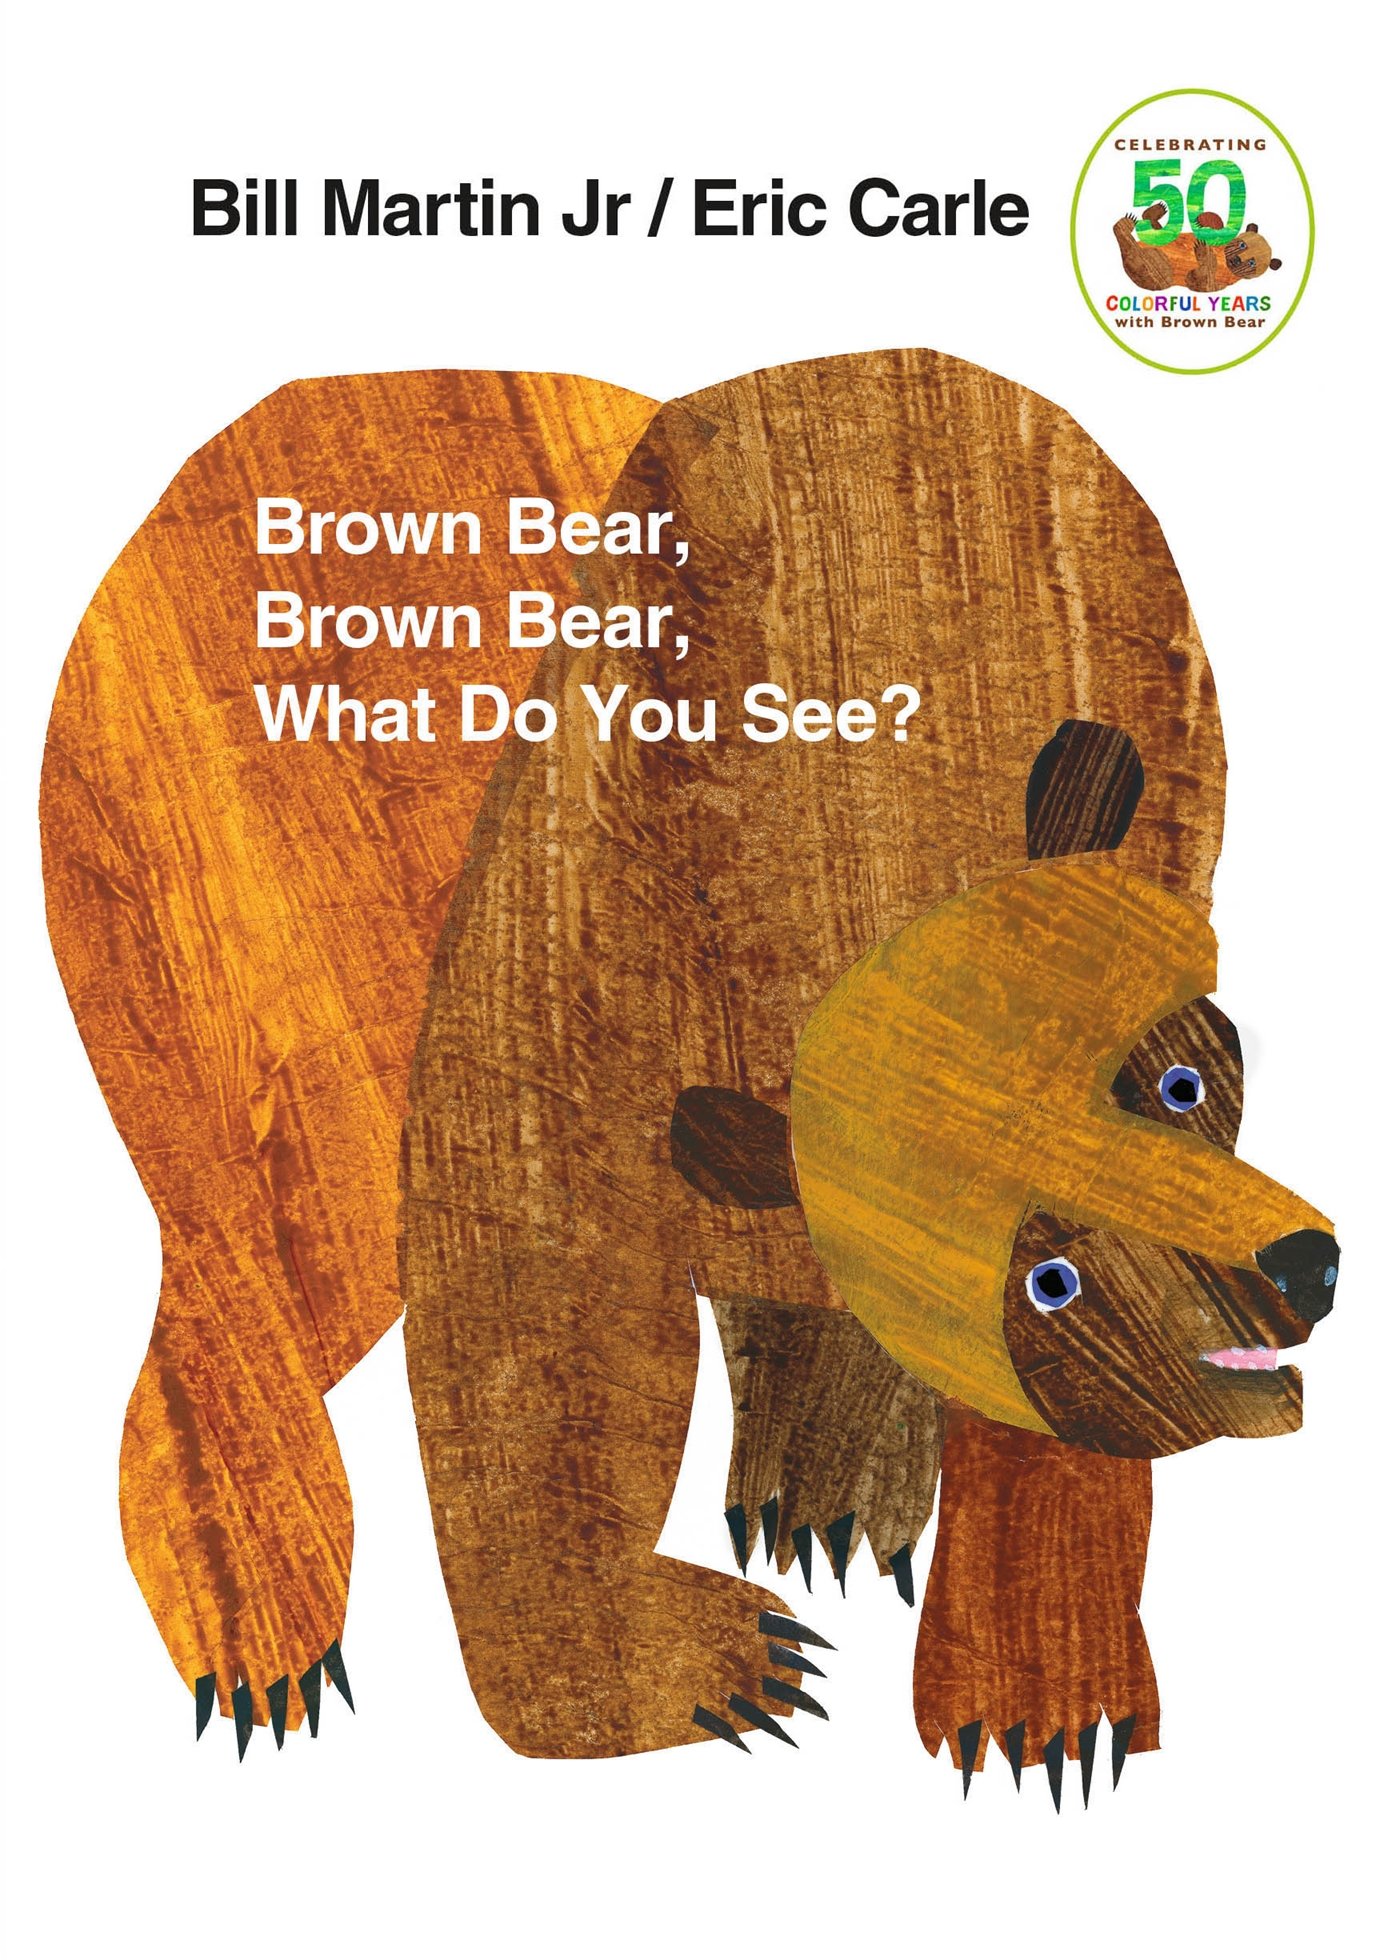 3. 'Brown Bear, Brown Bear, What Do You See?'